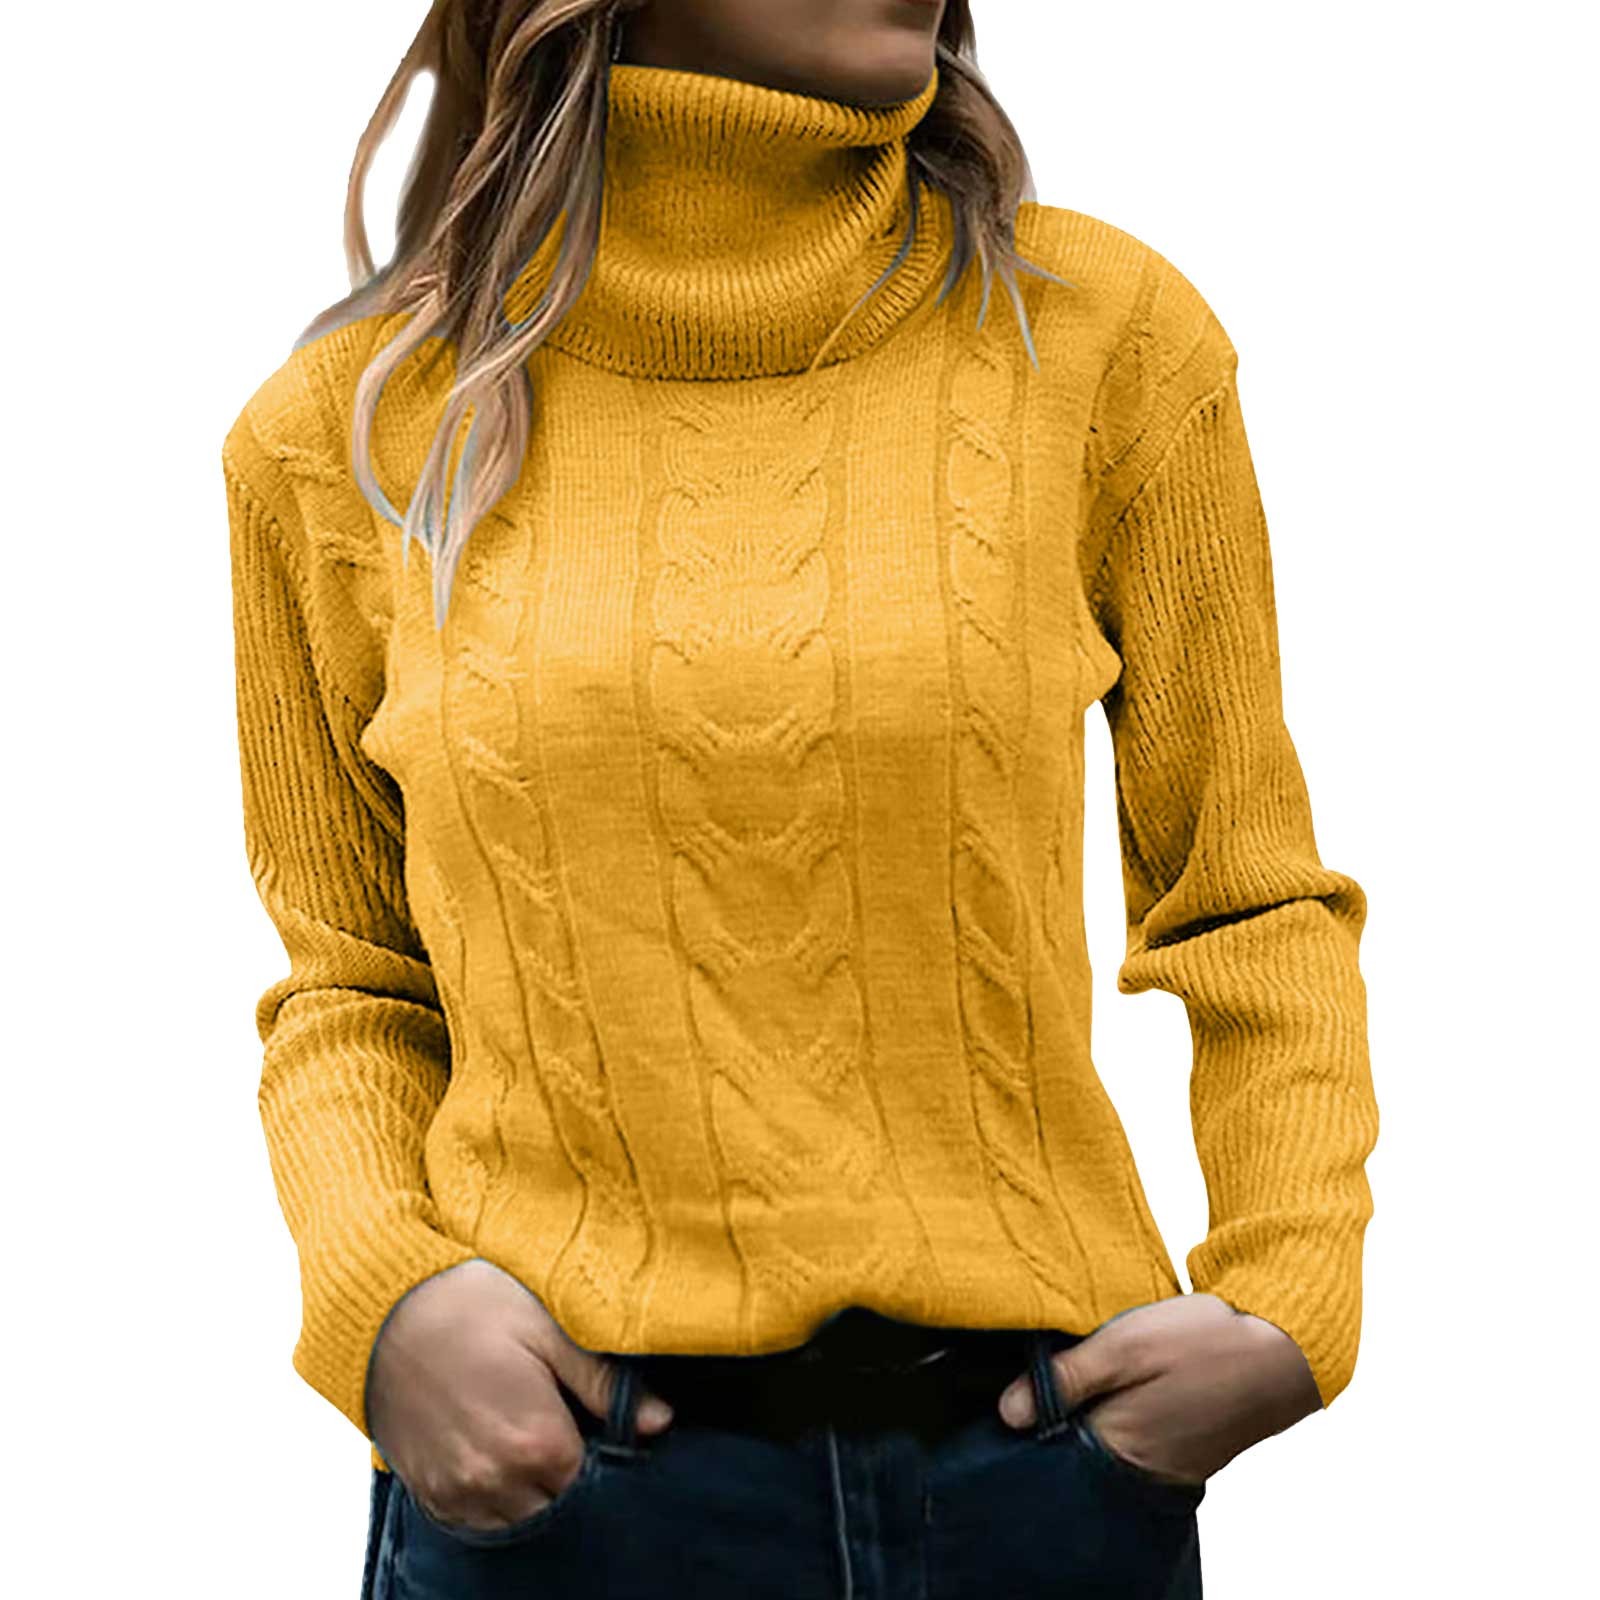 Women's Sweater Fashion Turtleneck Sweater Tops Loose Fit Solid Color ...